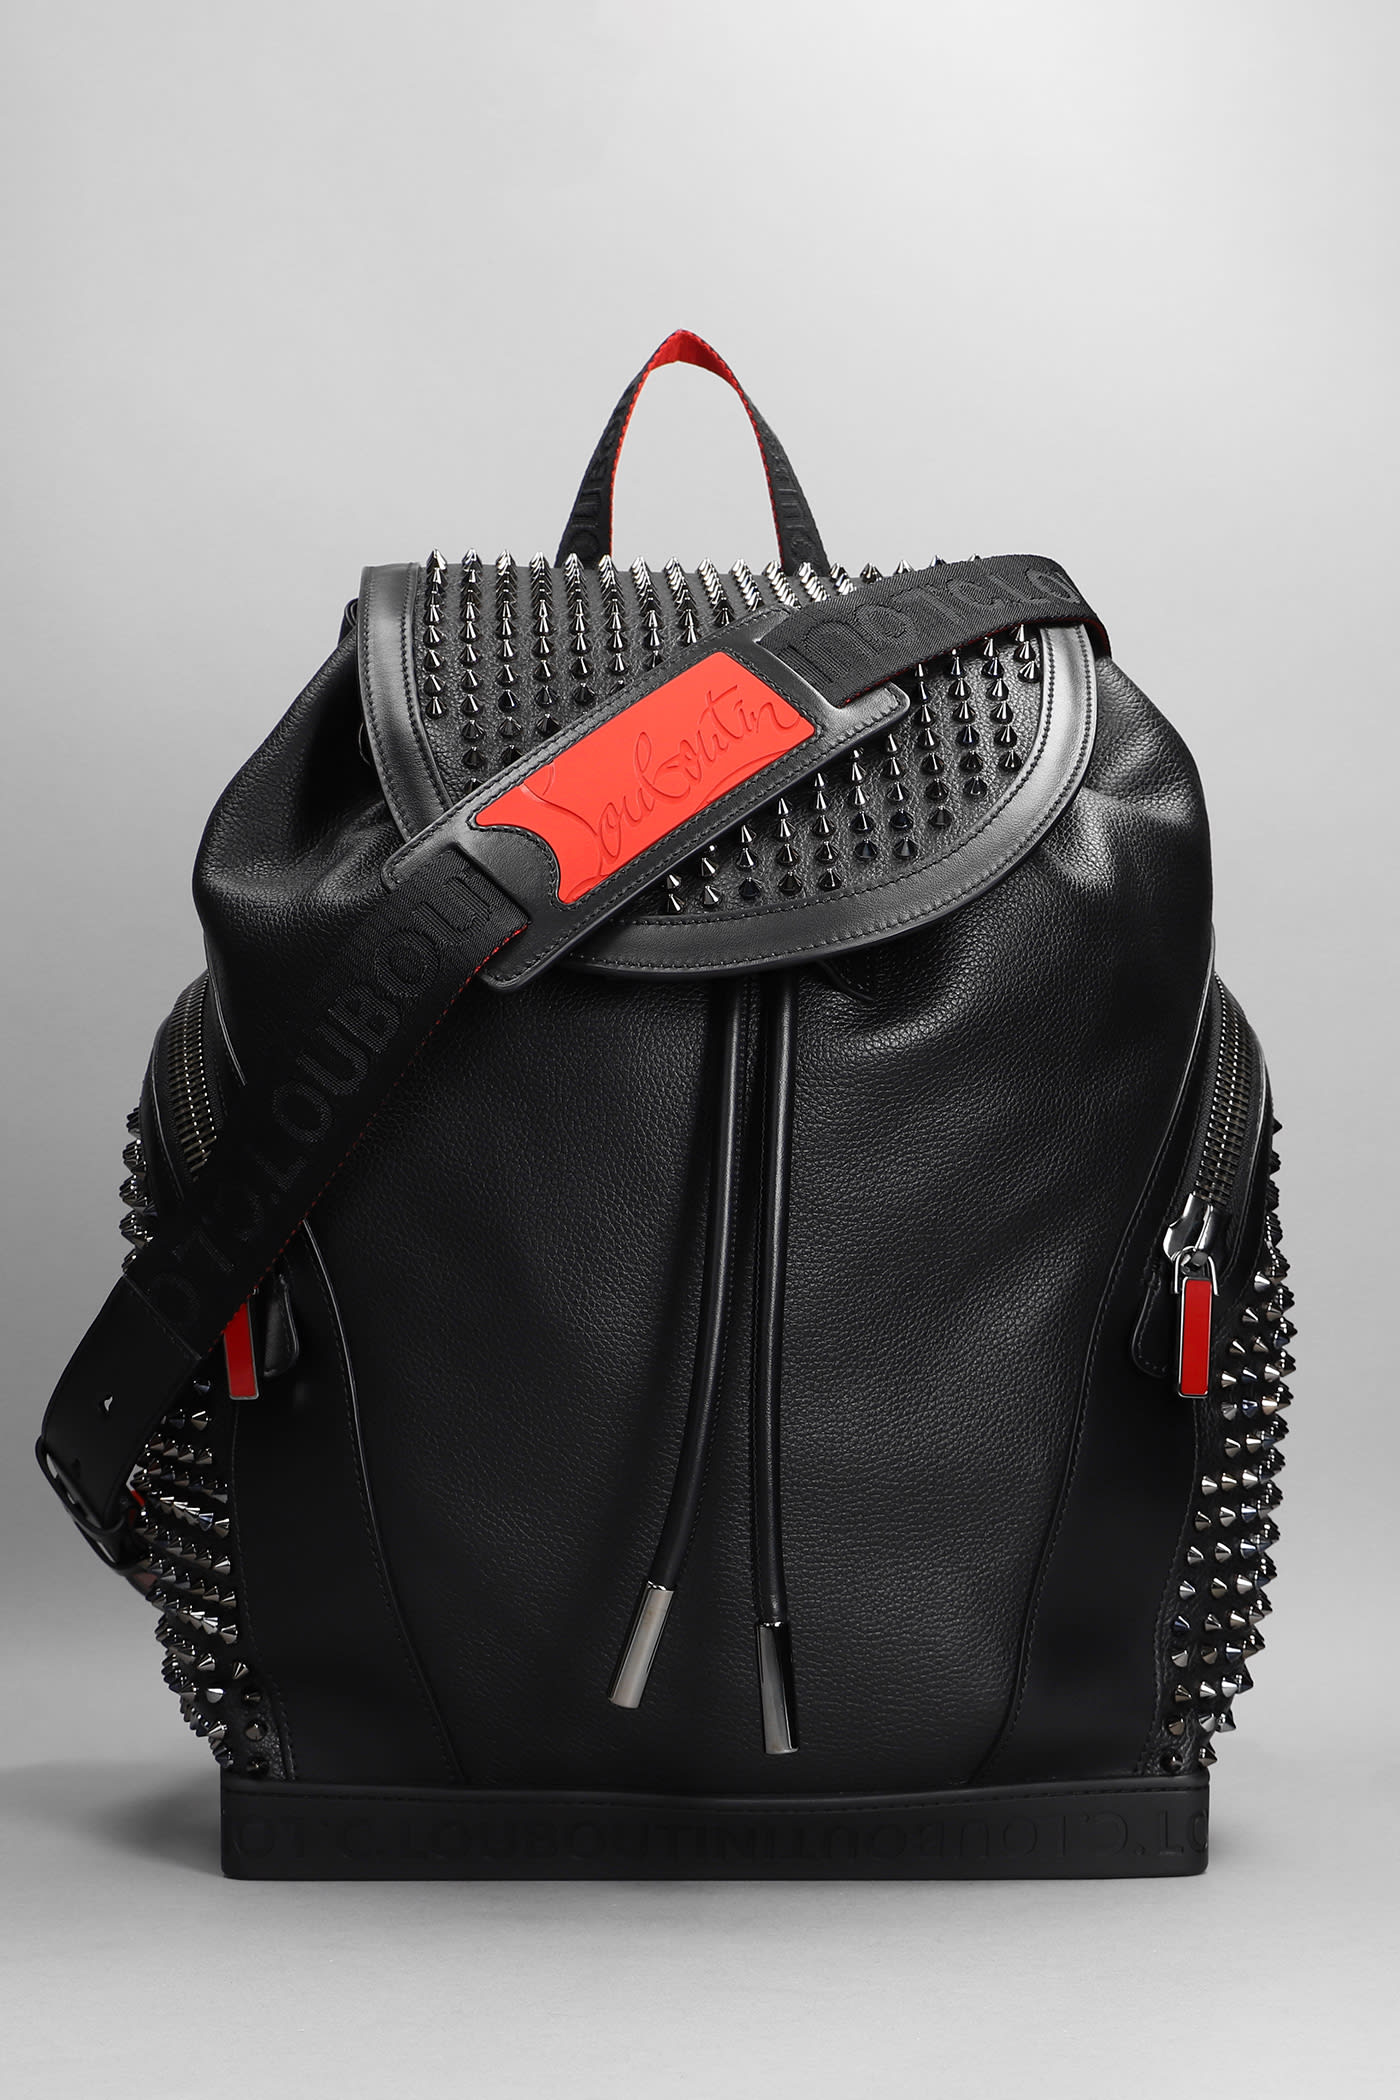 Christian Louboutin Backpack In Black Leather